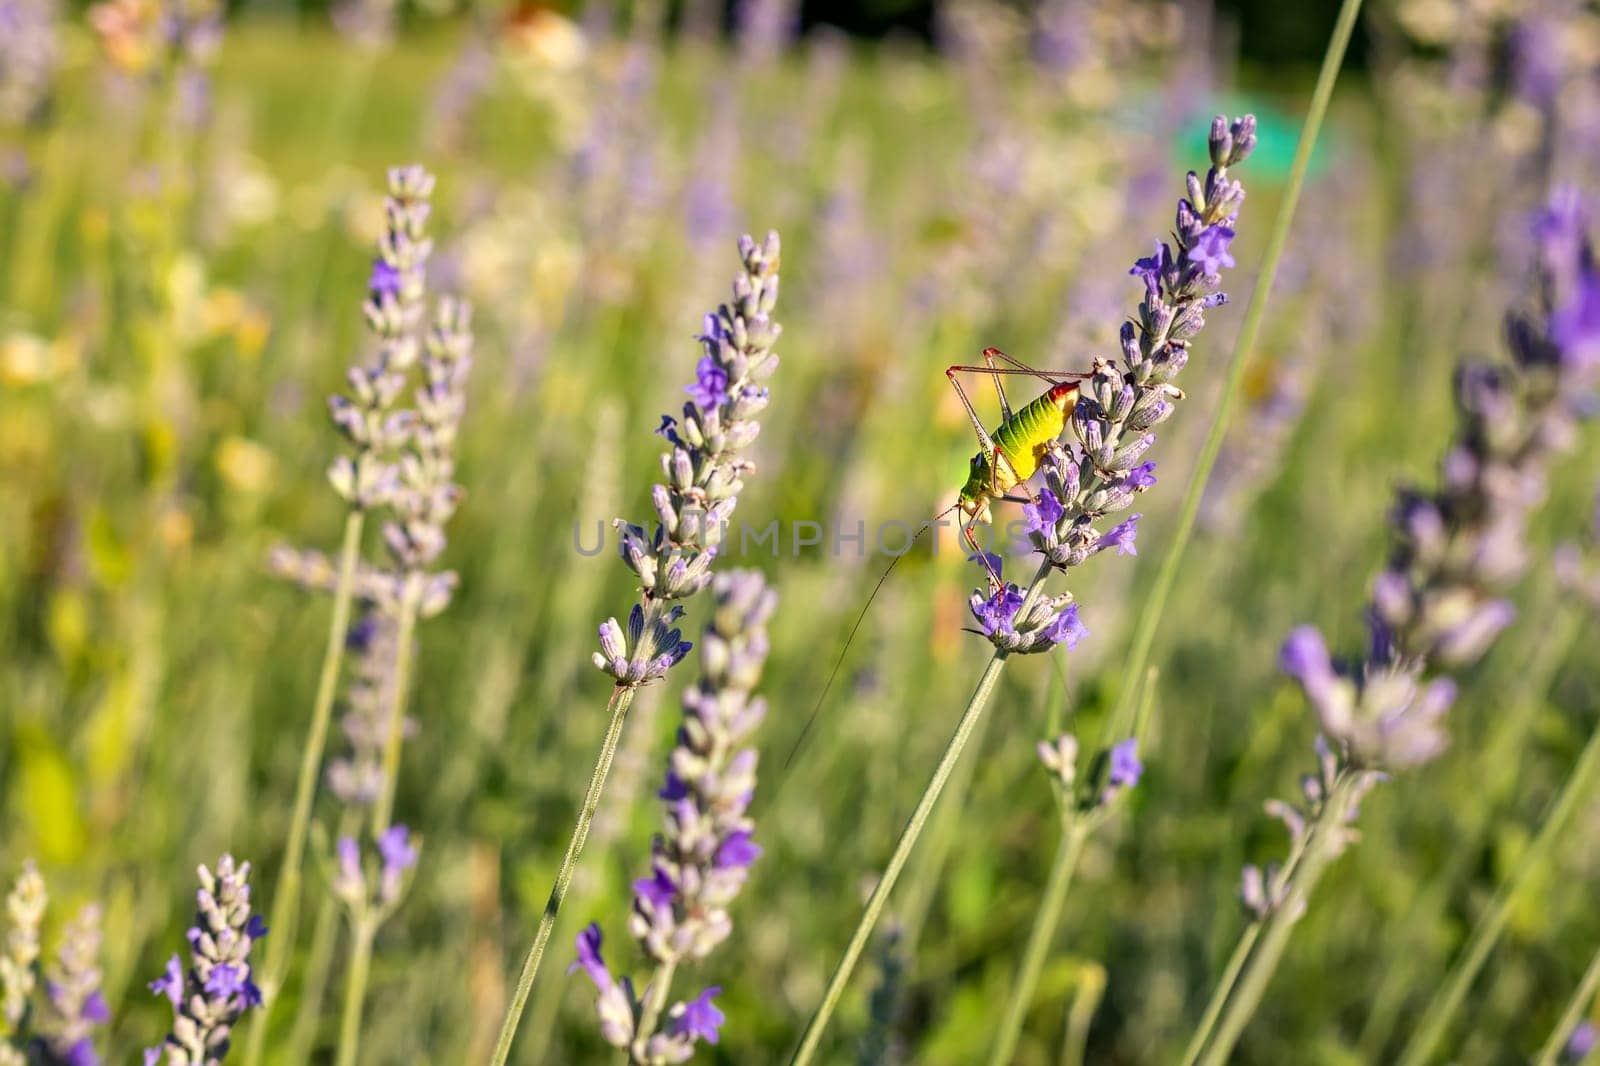  A colorful grasshopper sits on a lavender flower.